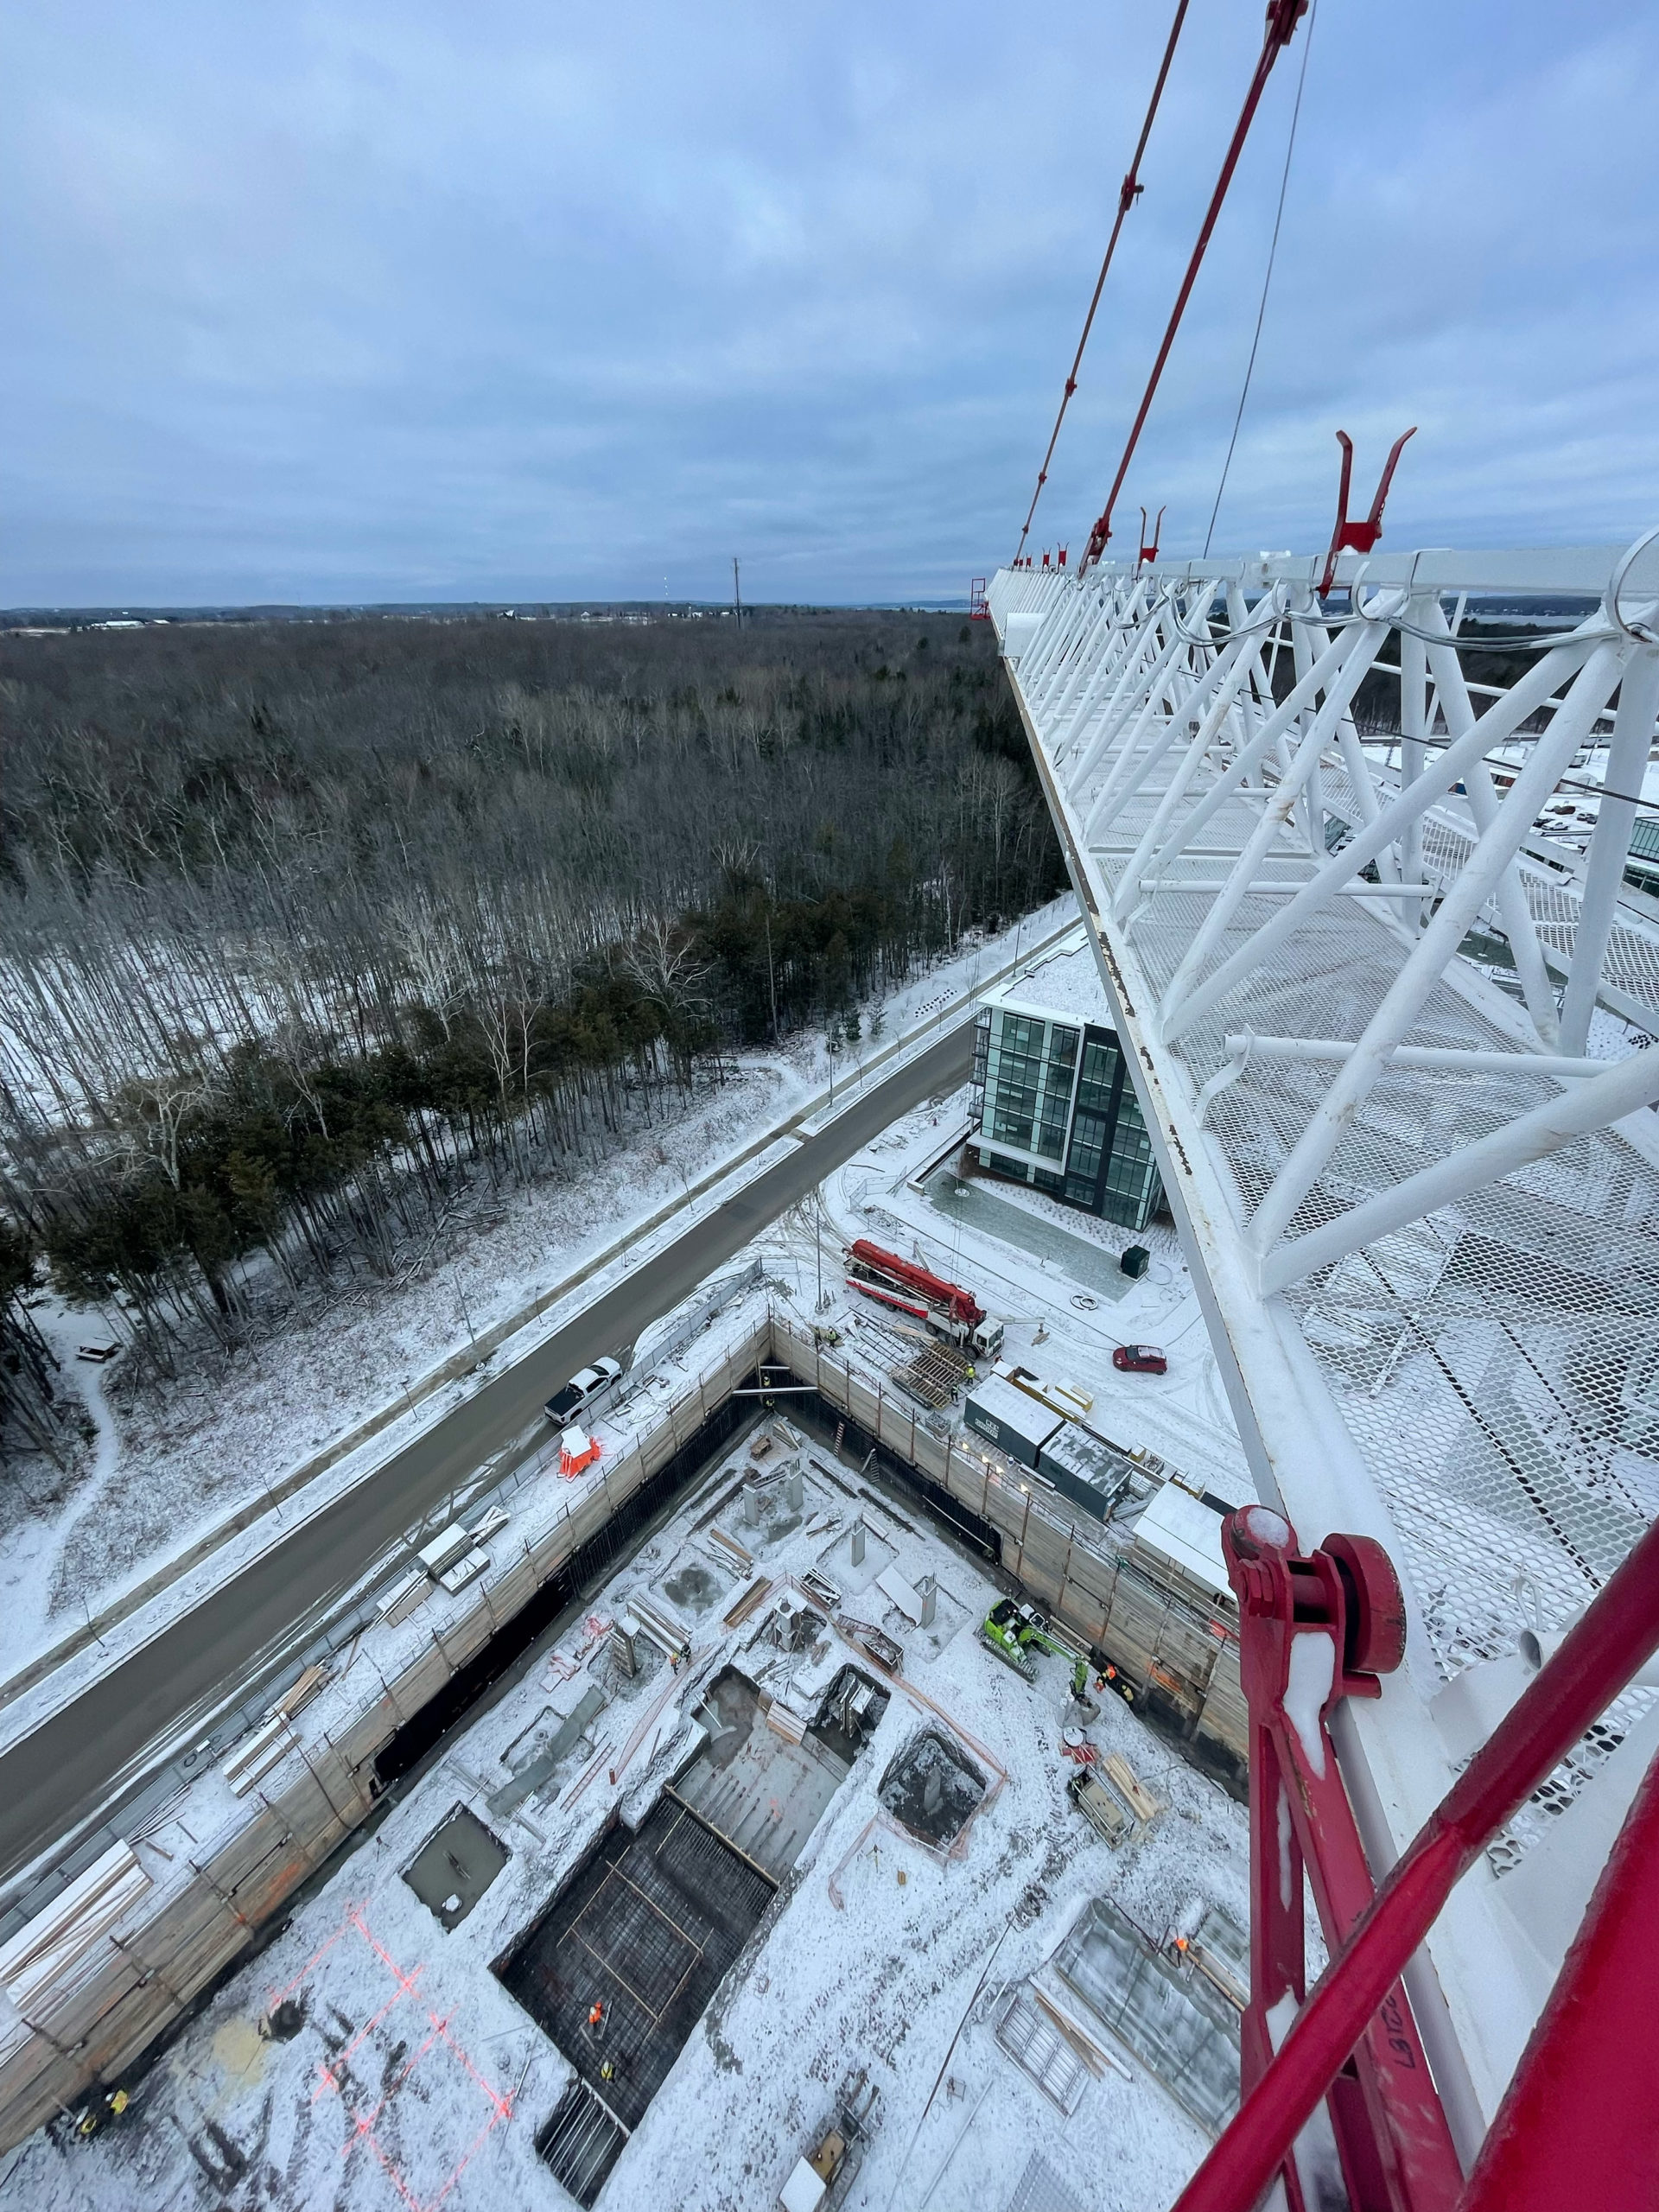 High angle shot from crane overlooking site below with snow covered grounds